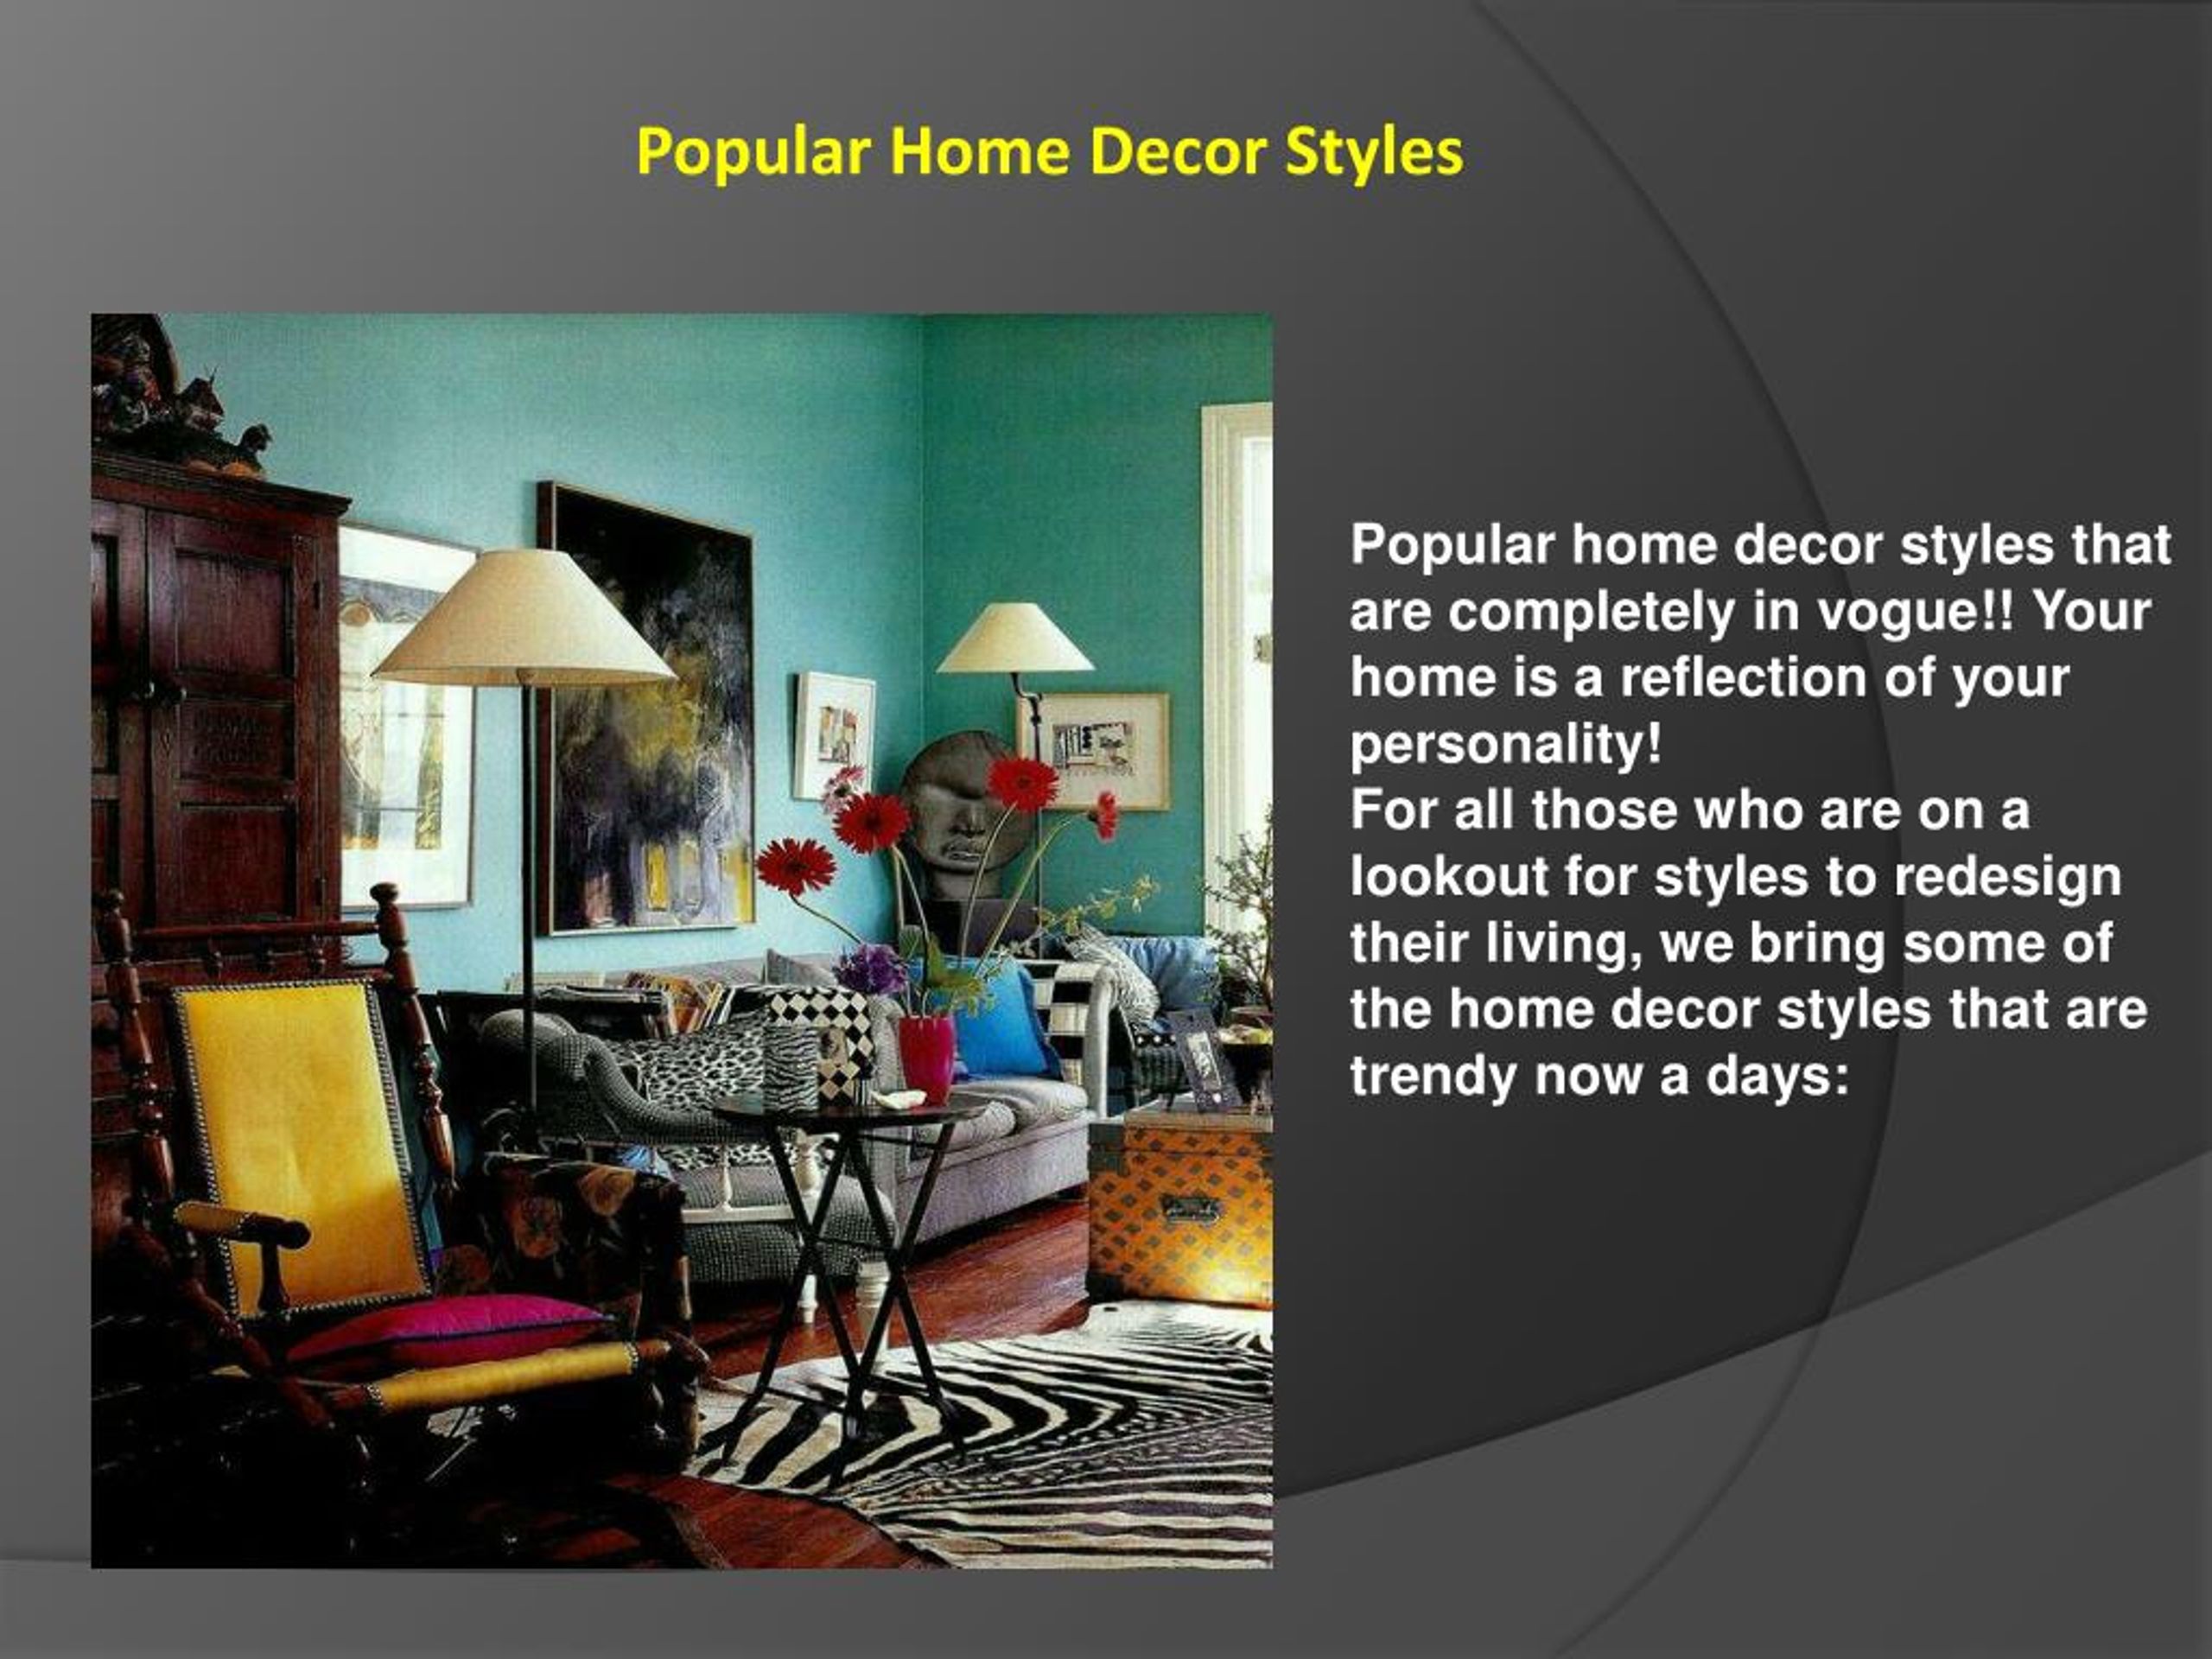 Ppt Popular Home Decor Styles Powerpoint Presentation Free Download Id 7971638